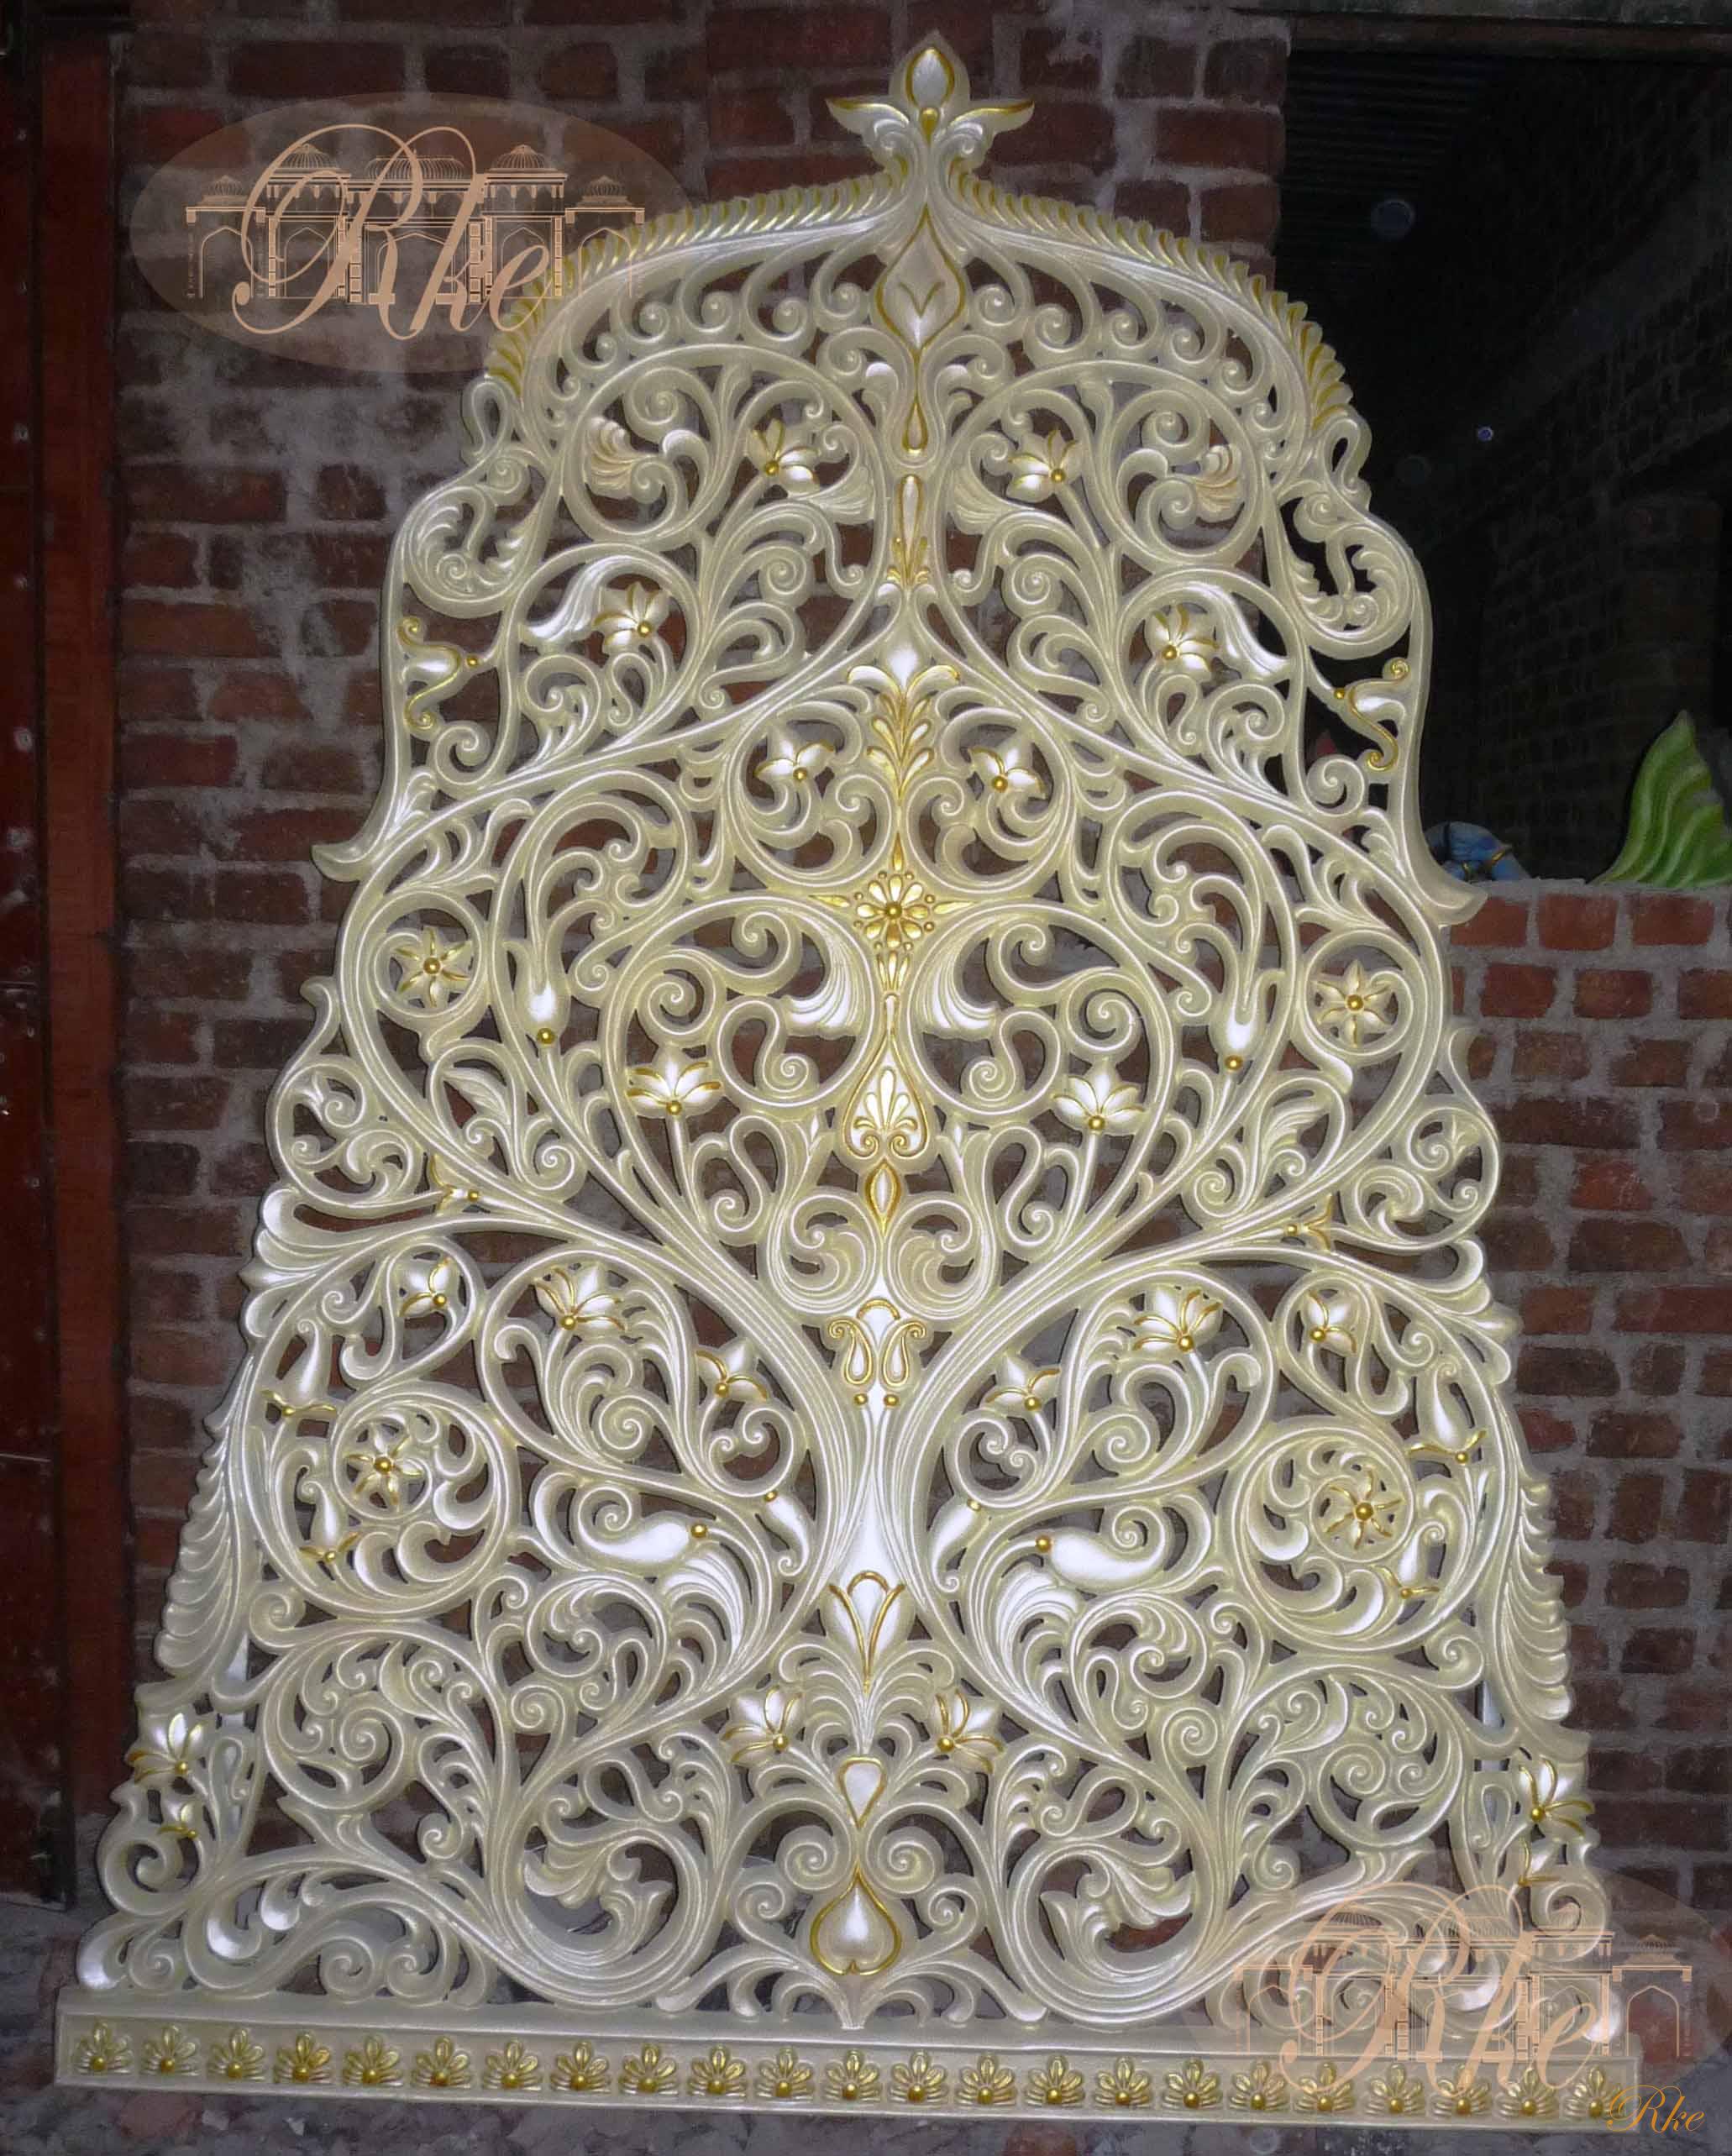 flower mandap stage jali design for backdrop fiberglass panel 8 feet long and 6 feet wide for unique wedding decor for bride and groom  